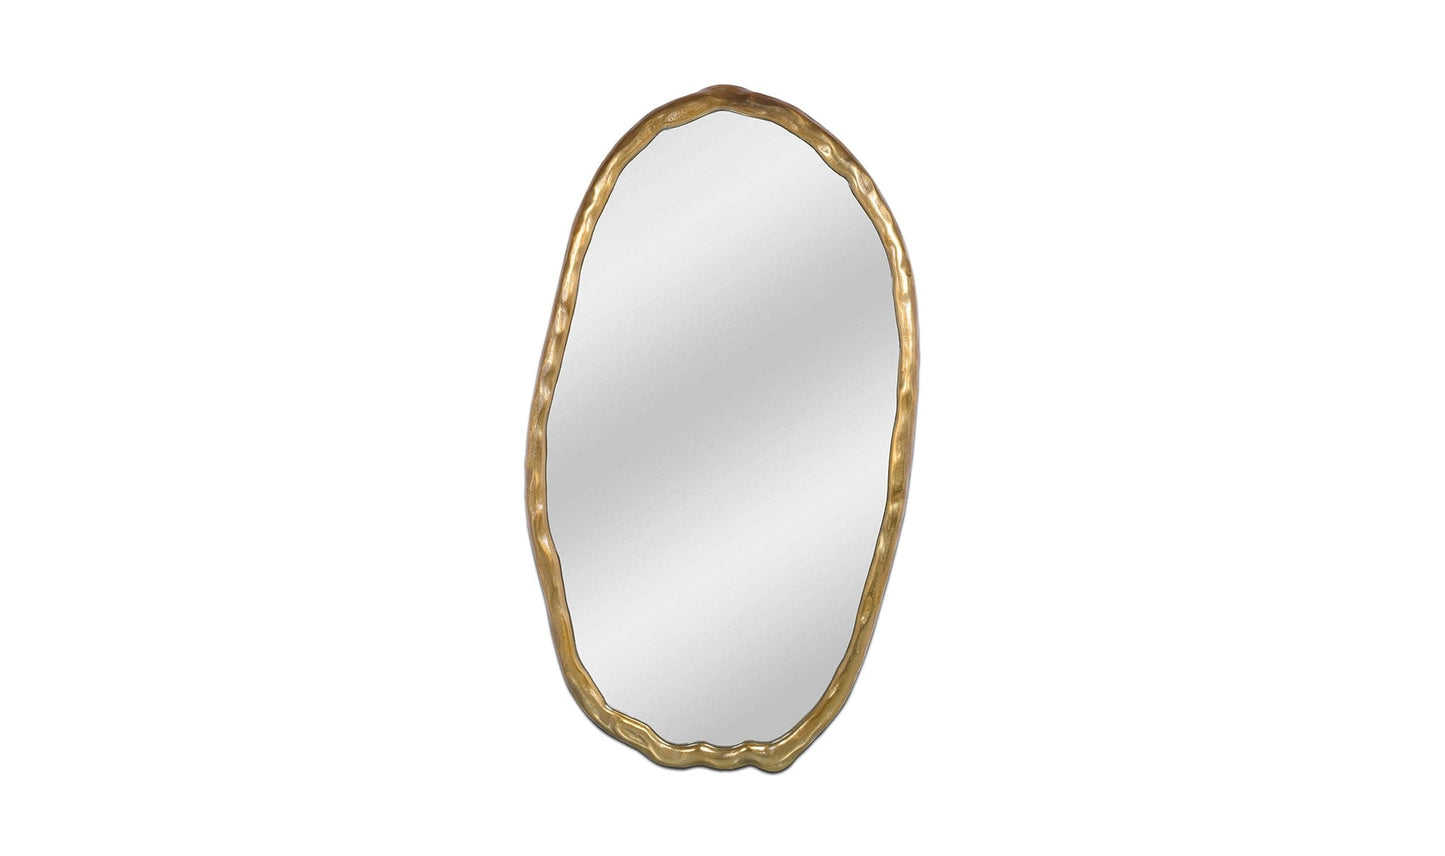 Moe's Gold FOUNDRY OVAL MIRROR